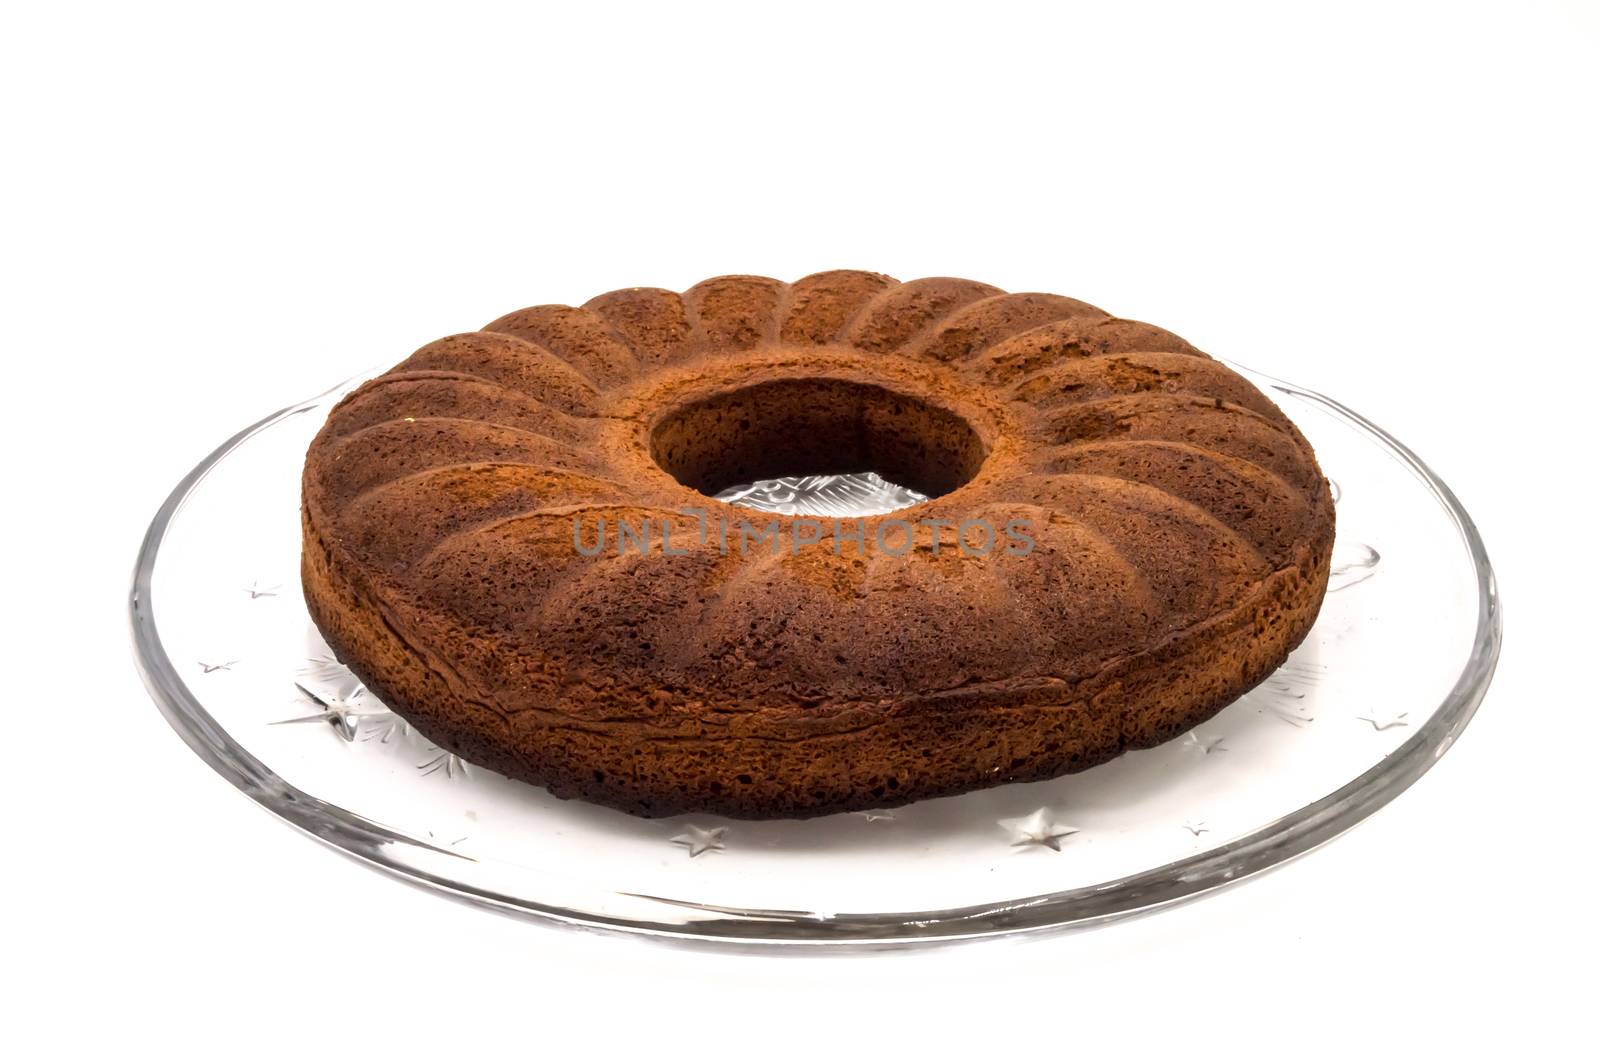 Circular marbled cake laying on a glass tray on a white background